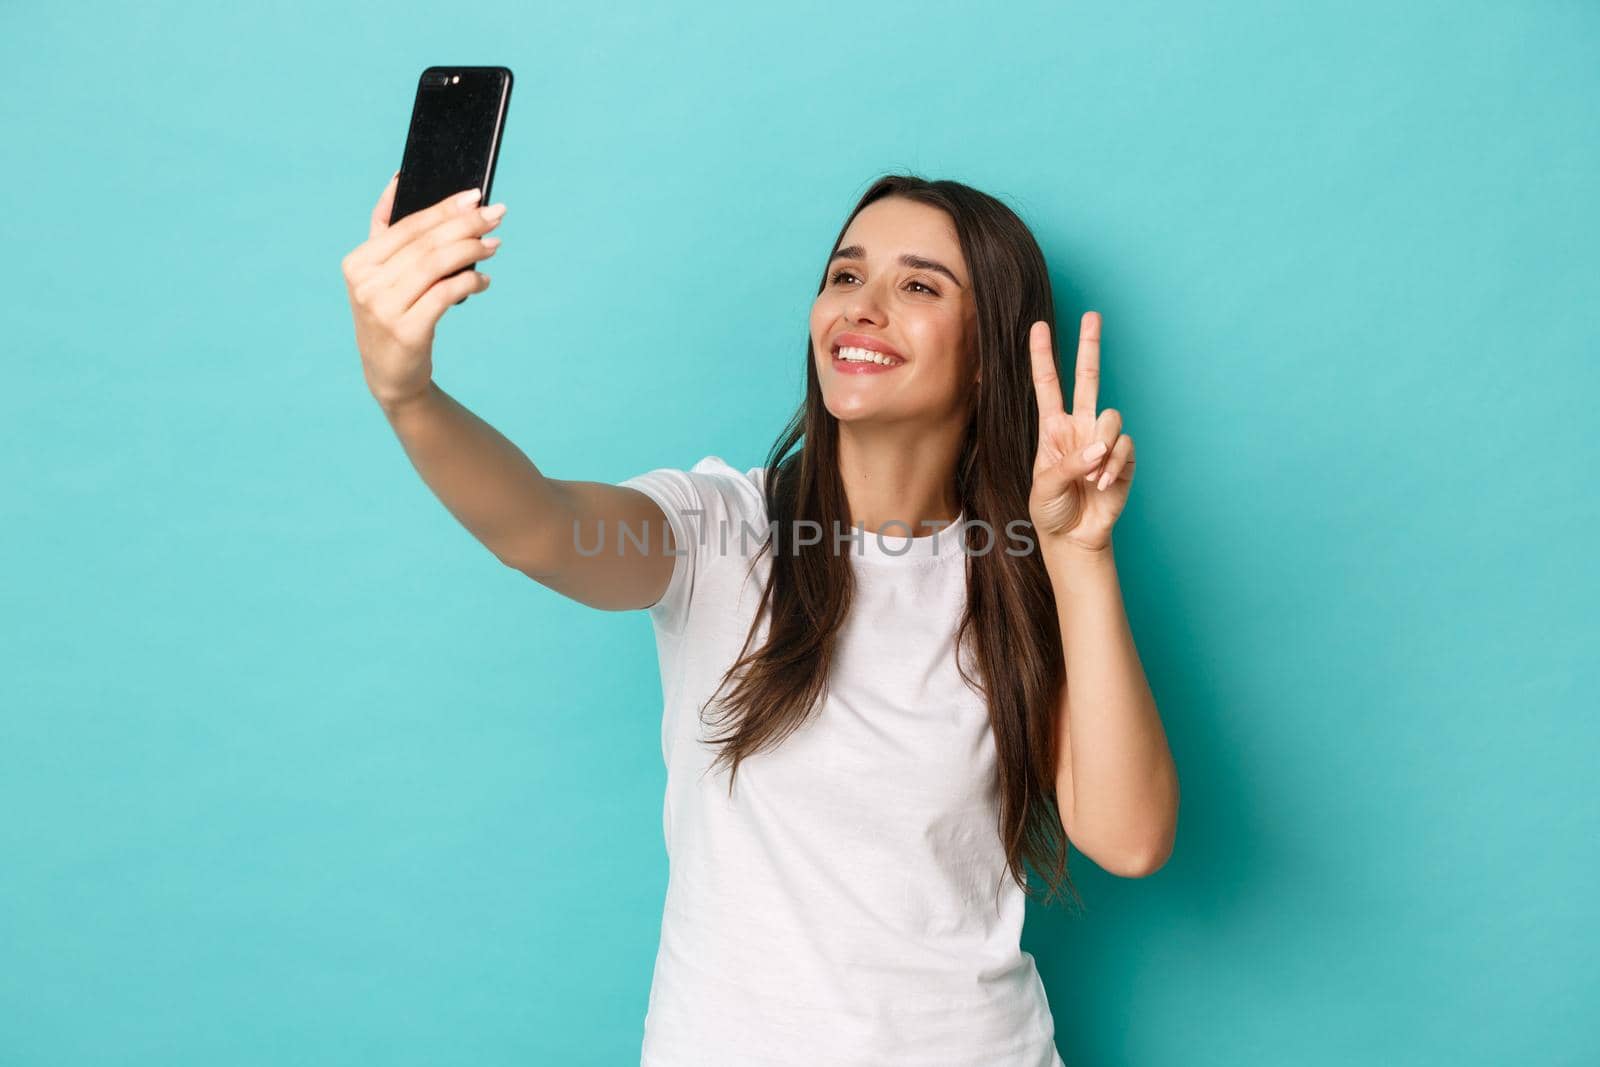 Portrait of beautiful happy woman in white t-shirt, taking selfie with peace sign, smiling at mobile phone, standing over blue background.